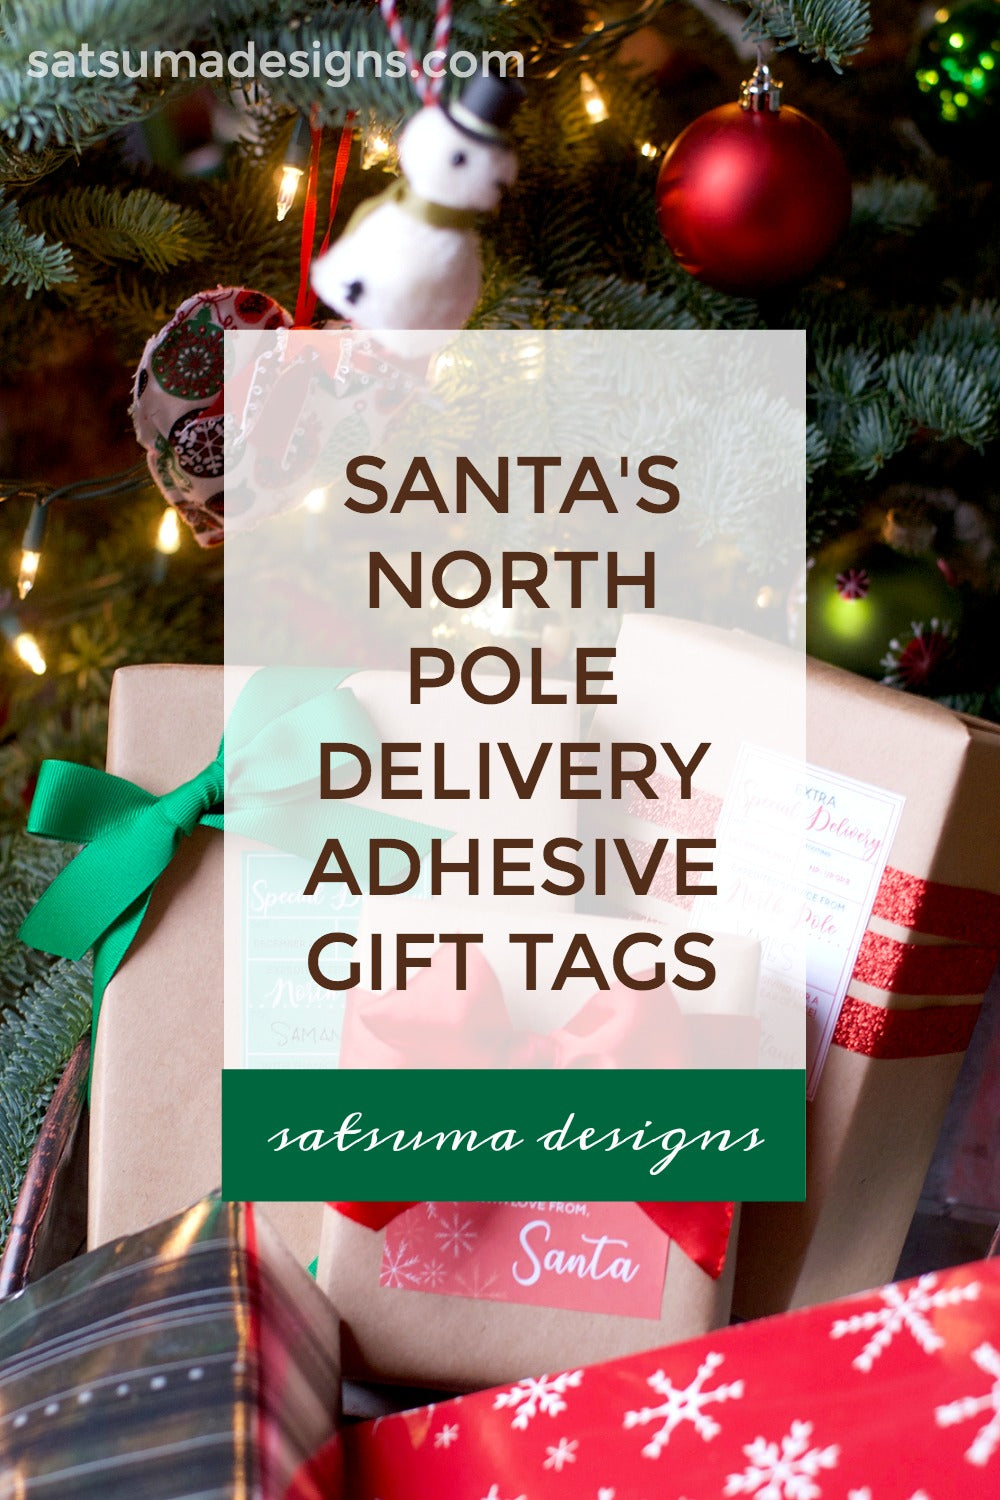 Santa's North Pole Delivery adhesive gift tags are a great solution for Christmas gift wrapping from the jolly old elf himself. This printable is easy to print onto Avery full sheet adhesive paper, cut to size and use right away. Enjoy! #printable #Christmas #SantaClaus #gifttags #gifttagprintable #adhesivegifttag #stickertags #stickergifttags